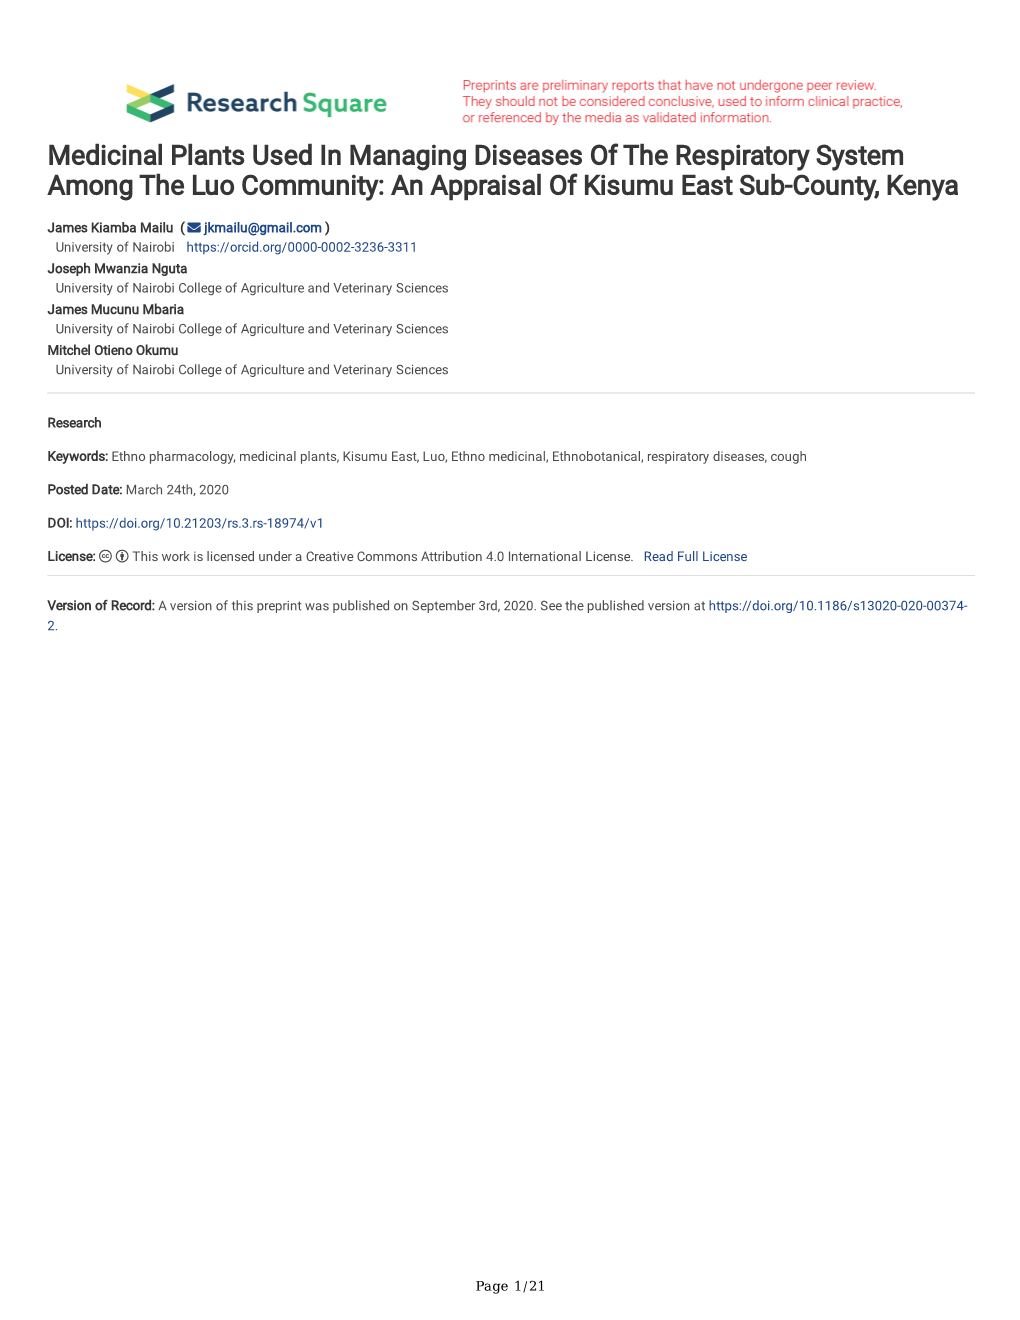 Medicinal Plants Used in Managing Diseases of the Respiratory System Among the Luo Community: an Appraisal of Kisumu East Sub-County, Kenya